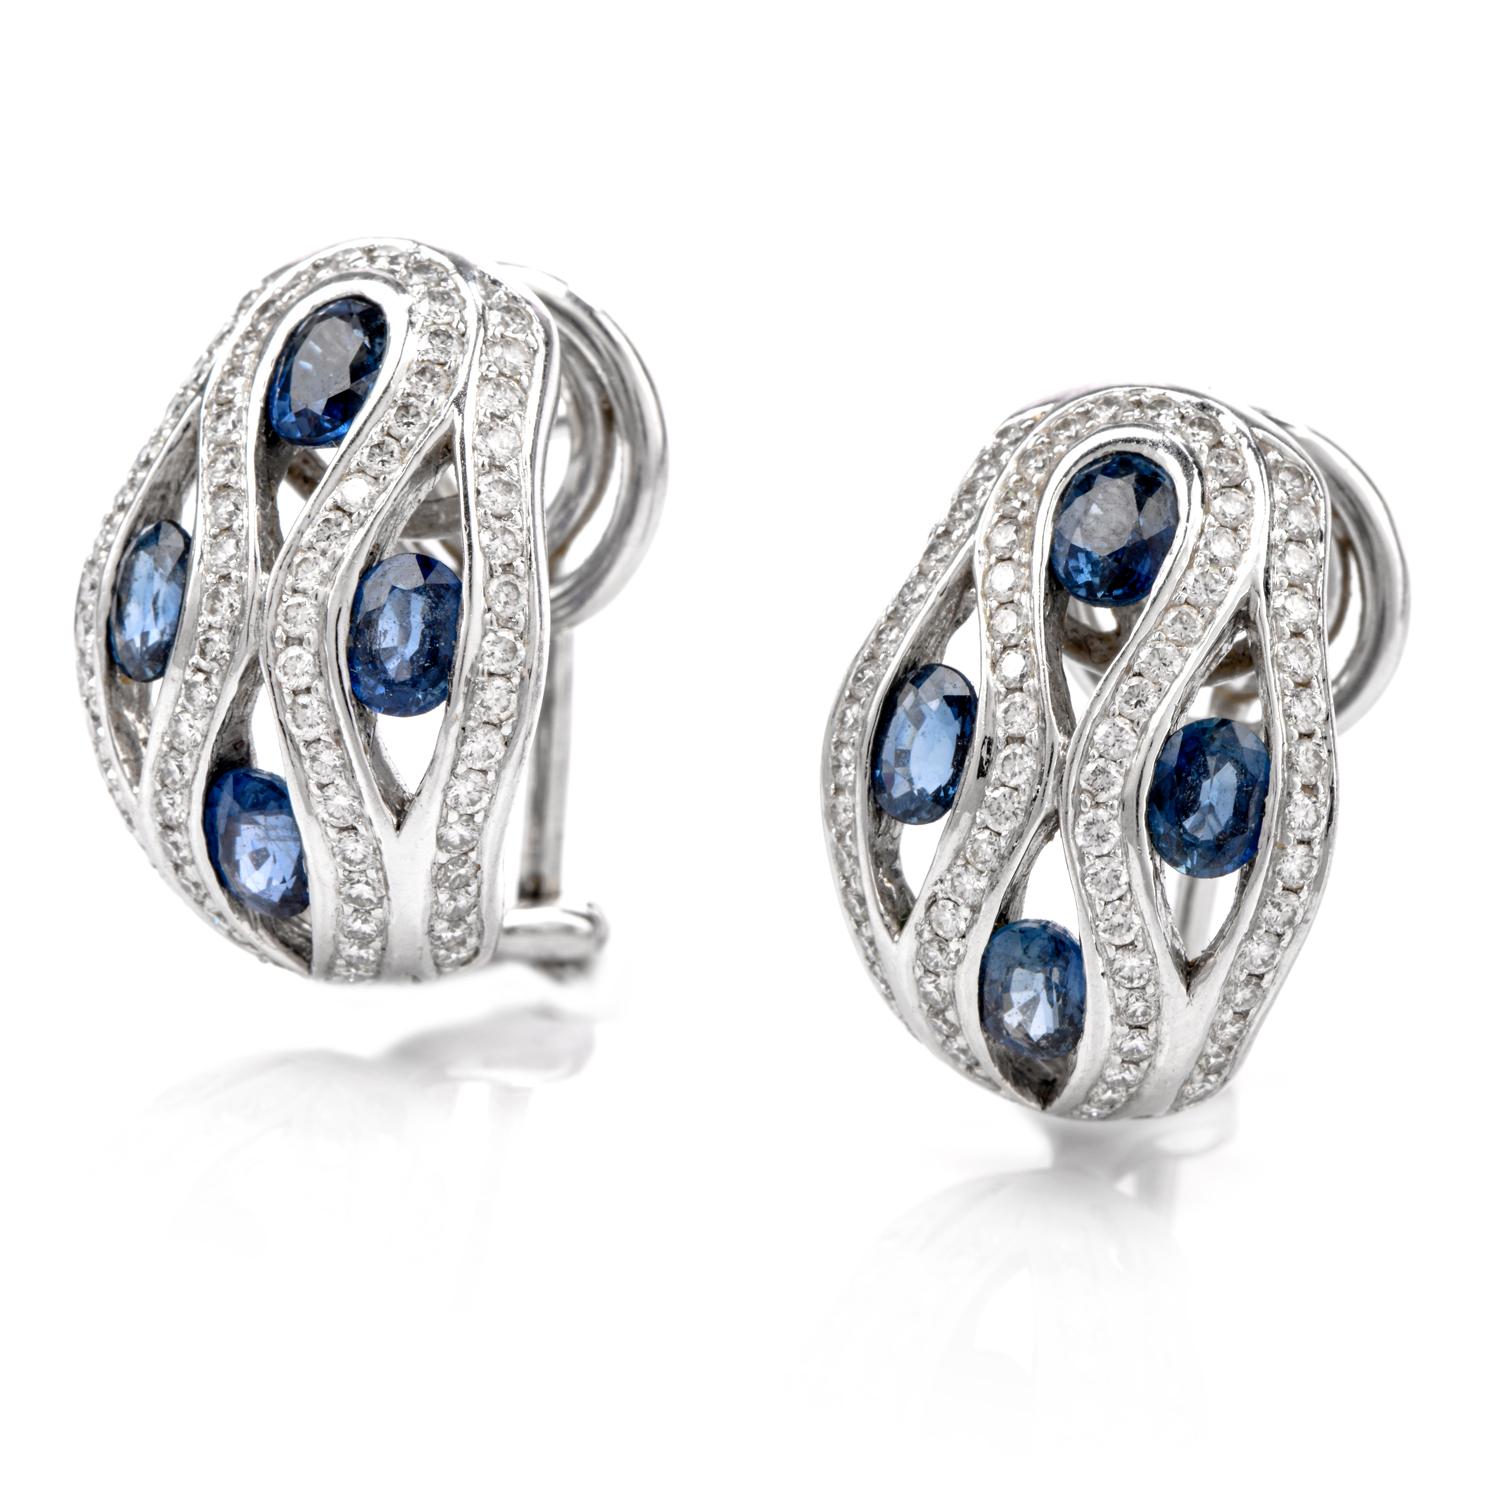 These stunning Diamond and Sapphire Dome Earrings were inspired in a 

flowing water motif and crafted in 18K white gold. 

Vibrant blue oval shaped Sapphire run down

the ear throughout the waves of white Diamonds.

Diamonds weigh appx. 1.05 carat